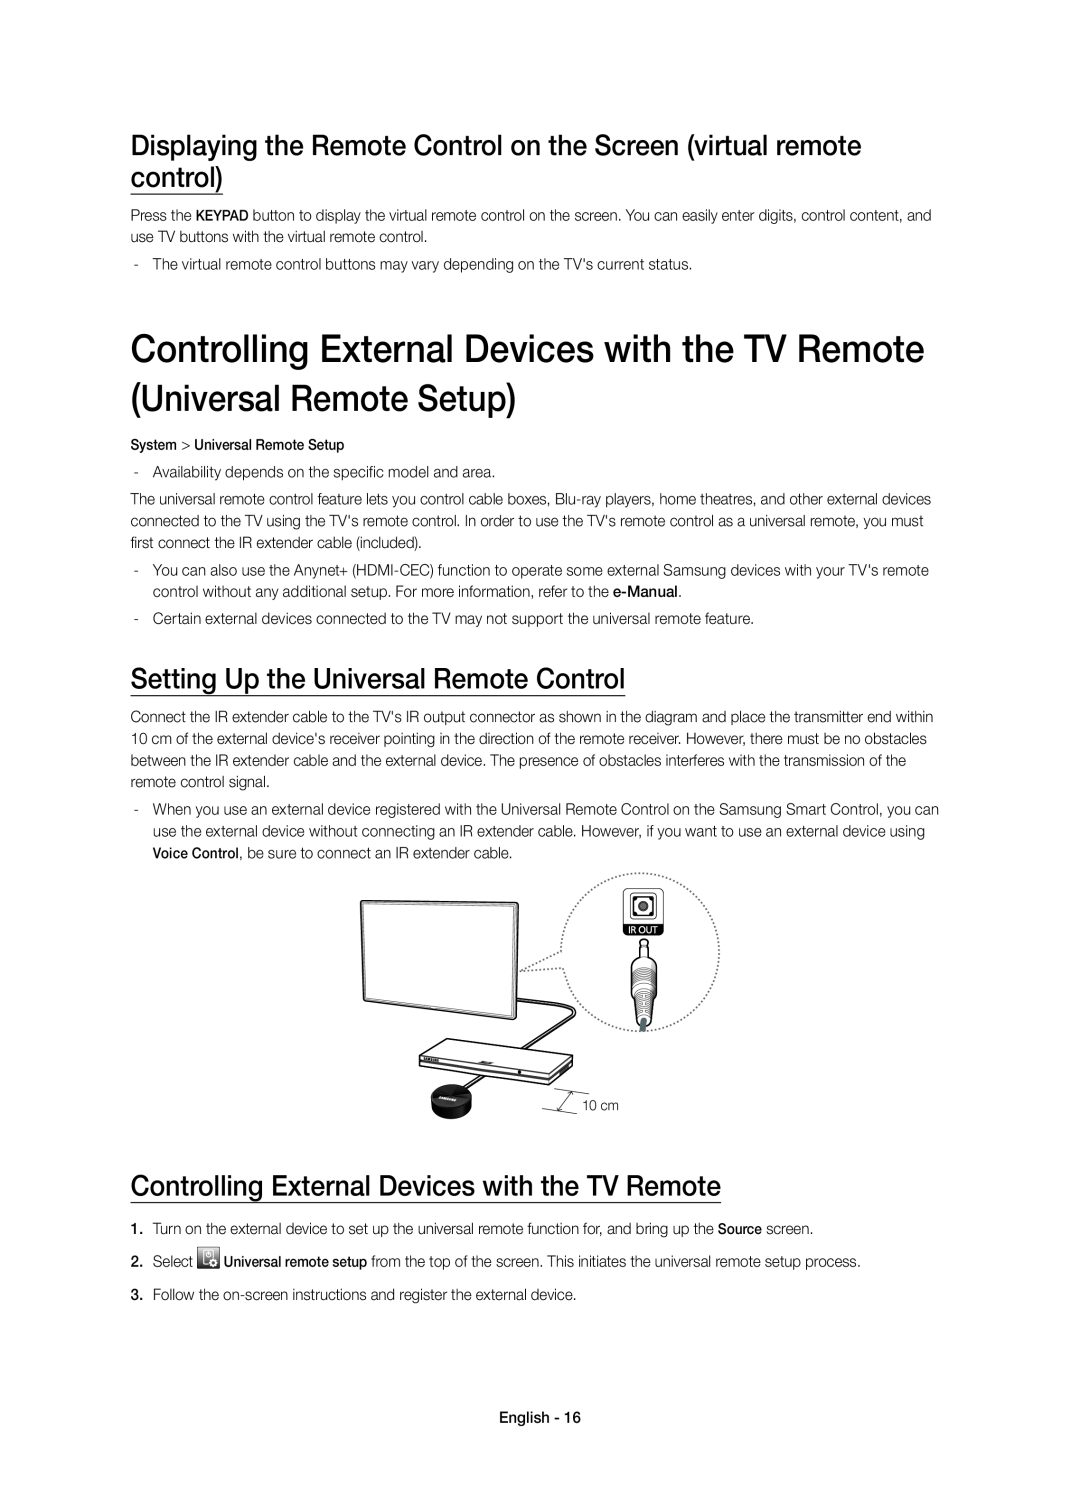 Samsung UE55H6740SVXZG Displaying the Remote Control on the Screen virtual remote control, System Universal Remote Setup 